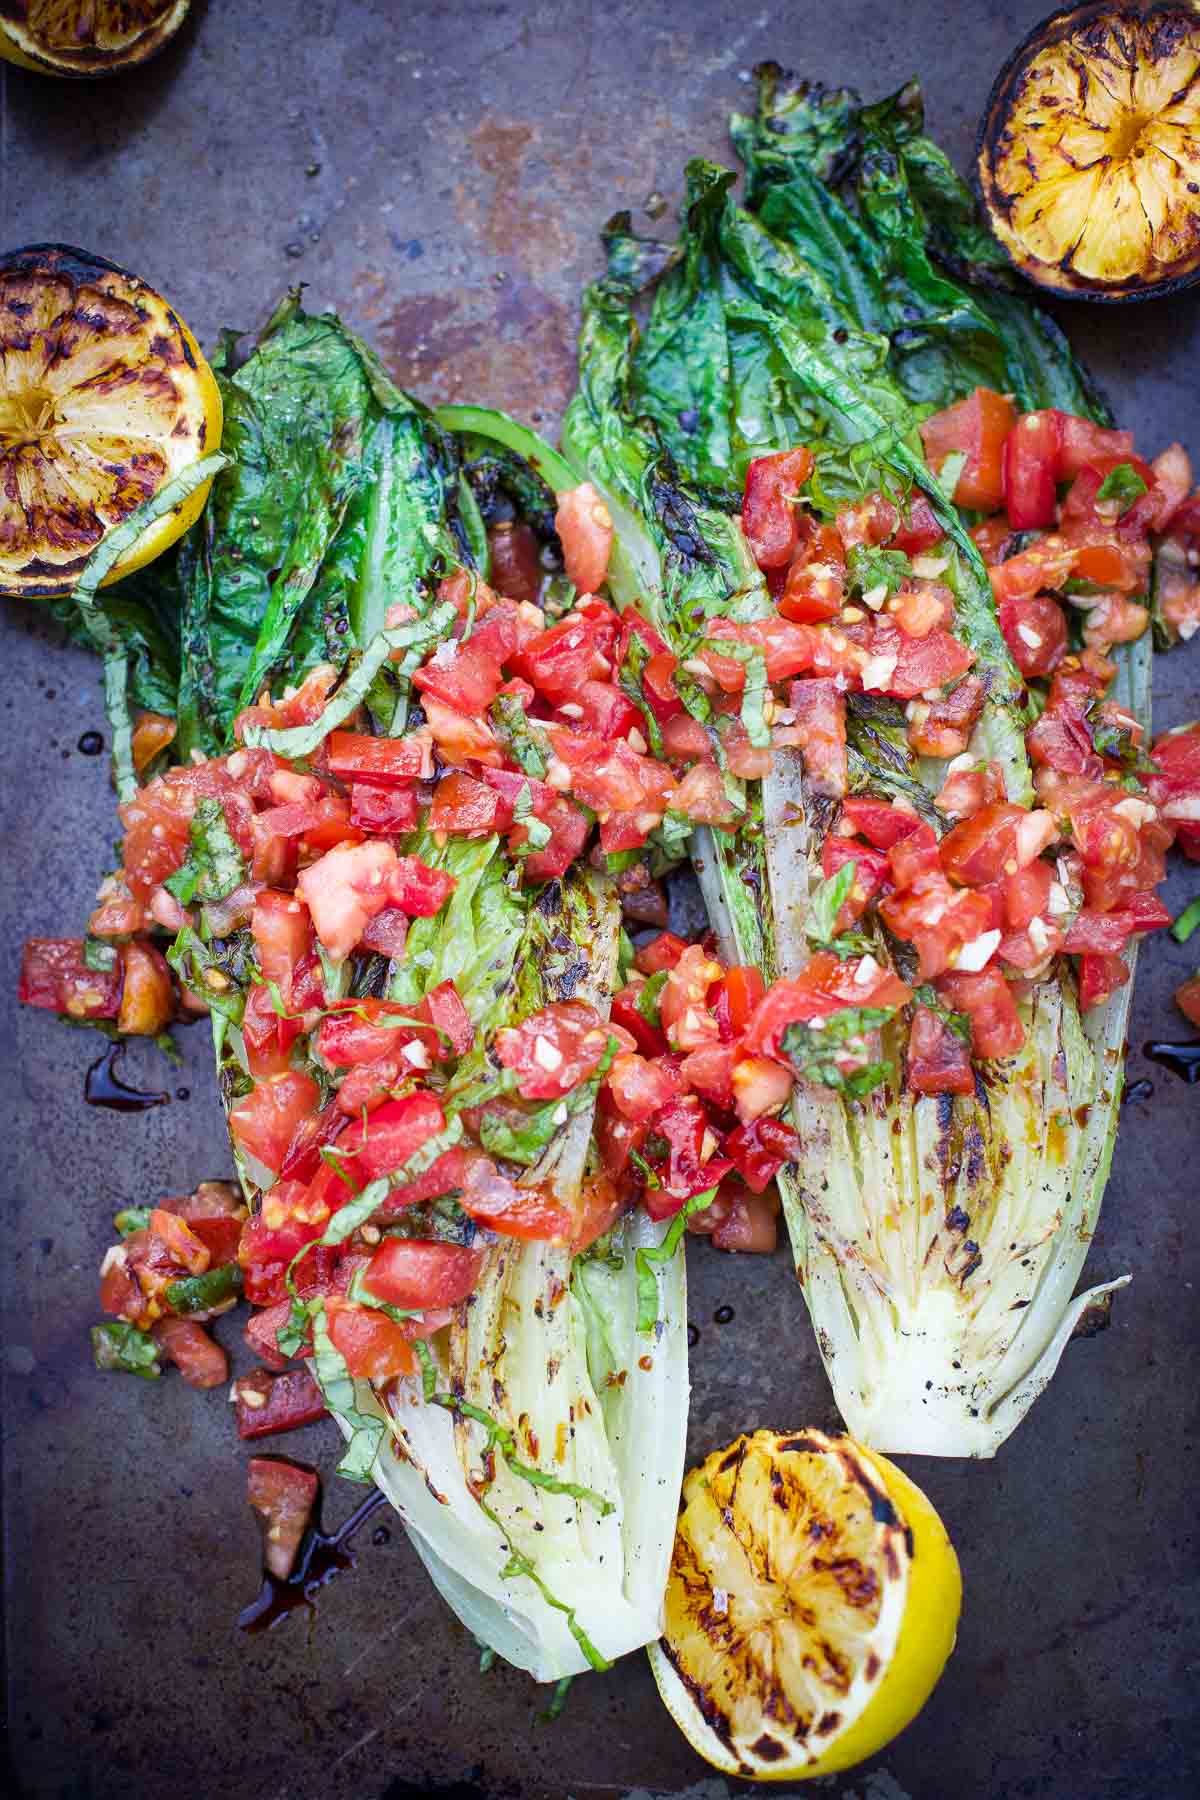 Grilled Romaine Lettuce topped with Tomatoes, Basil, and Balsamic on a serving platter